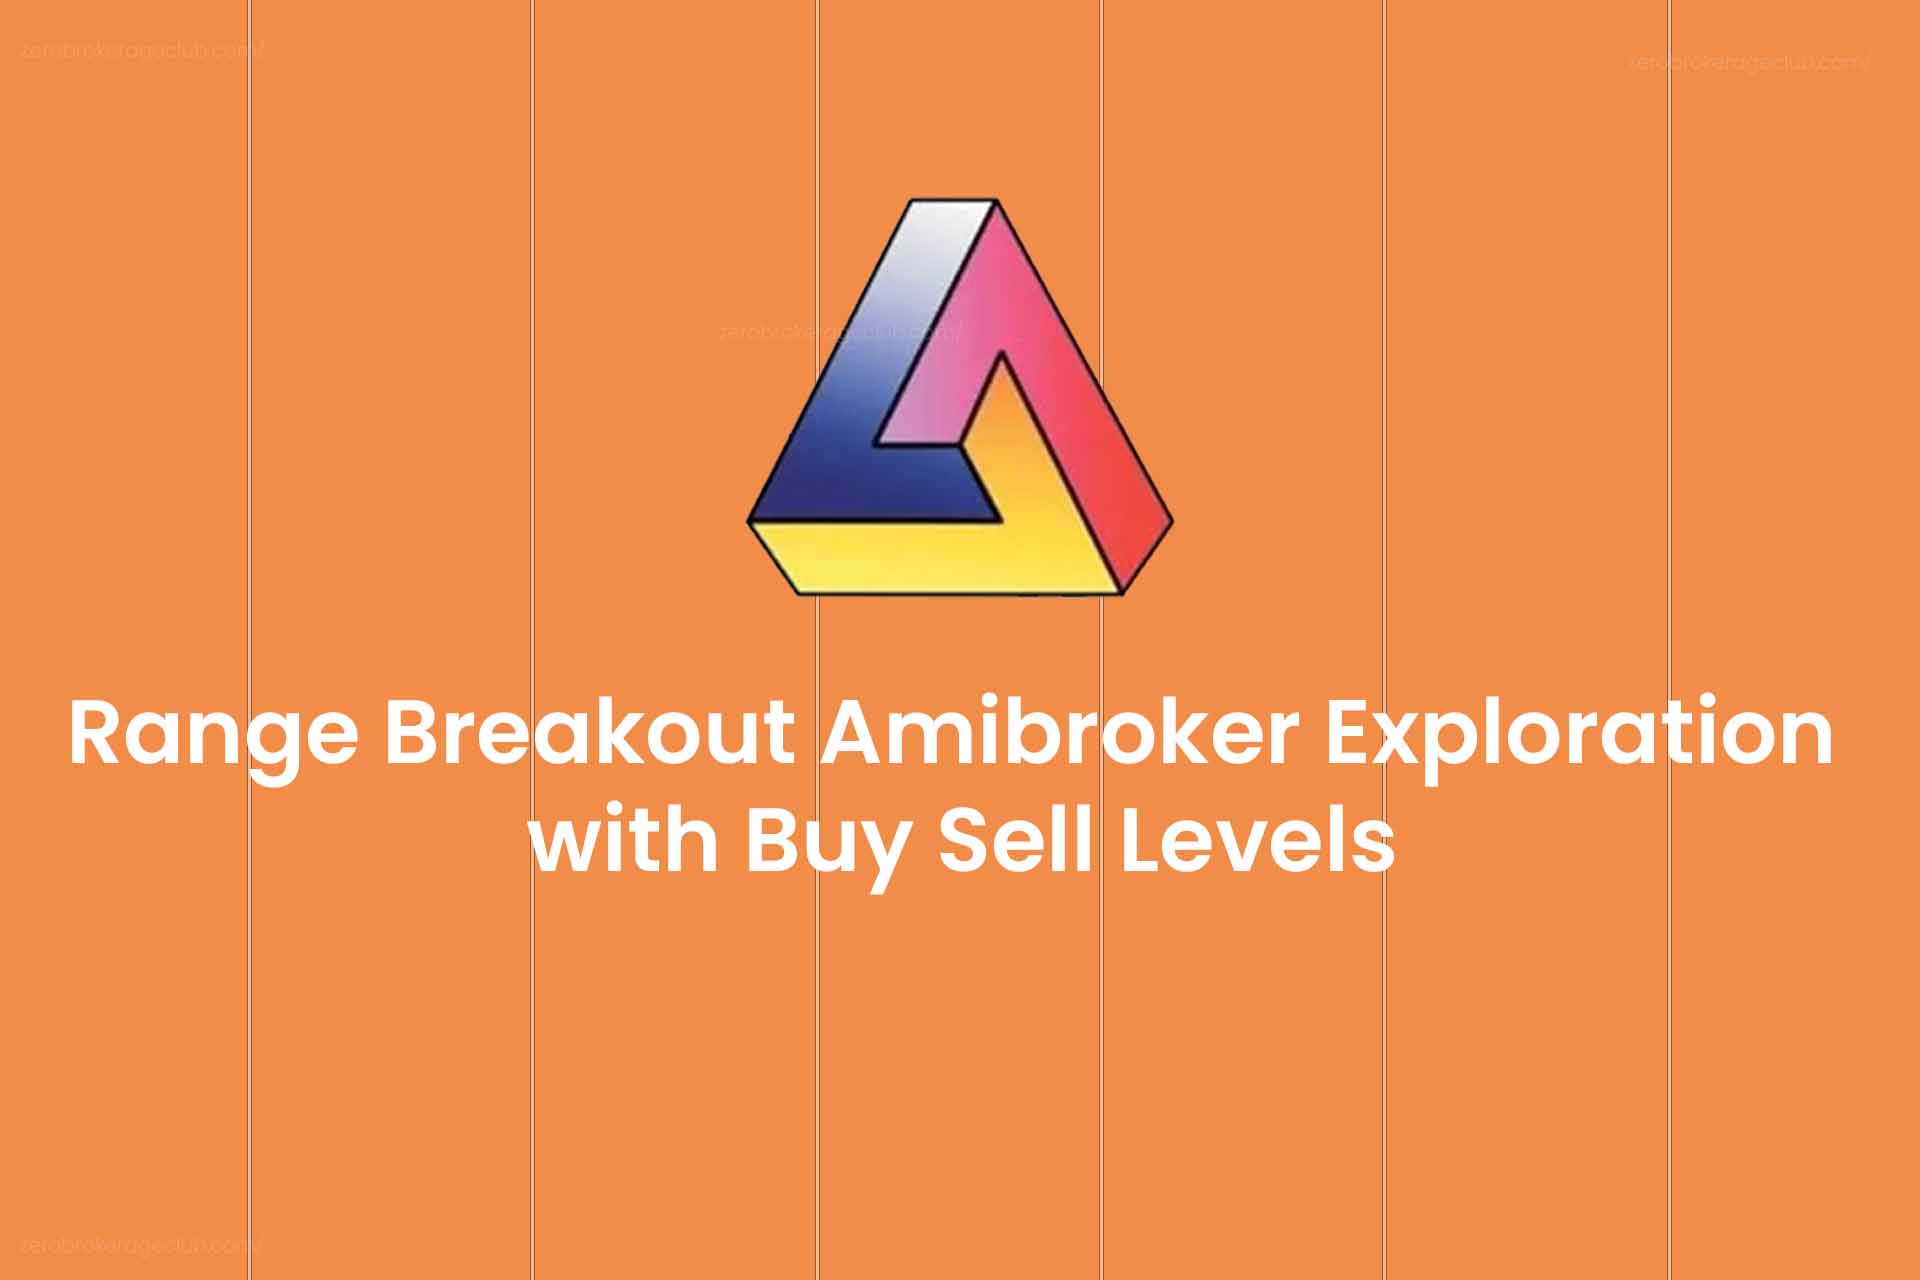 Range Breakout Amibroker Exploration with Buy Sell Levels